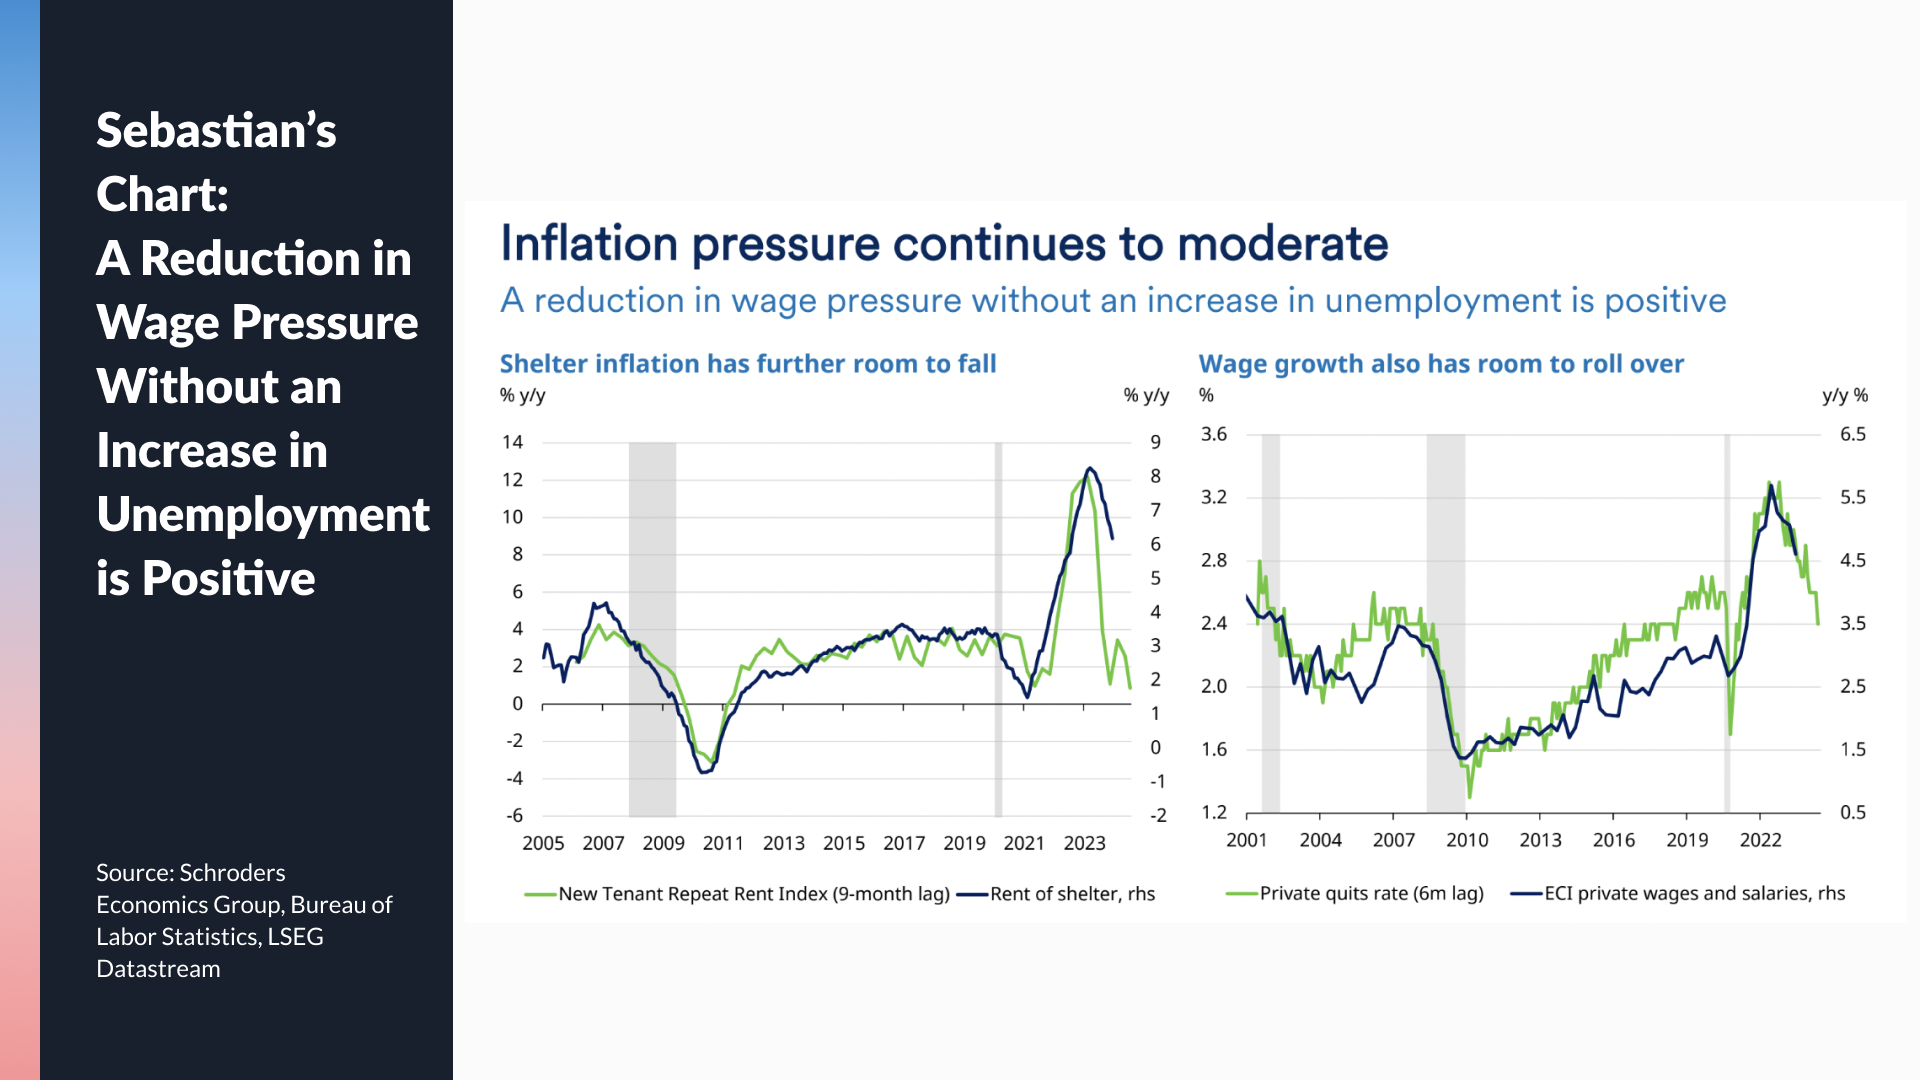 Sebastian-s Chart A reduction in wage pressure without an increase in unemployment is positive (1)